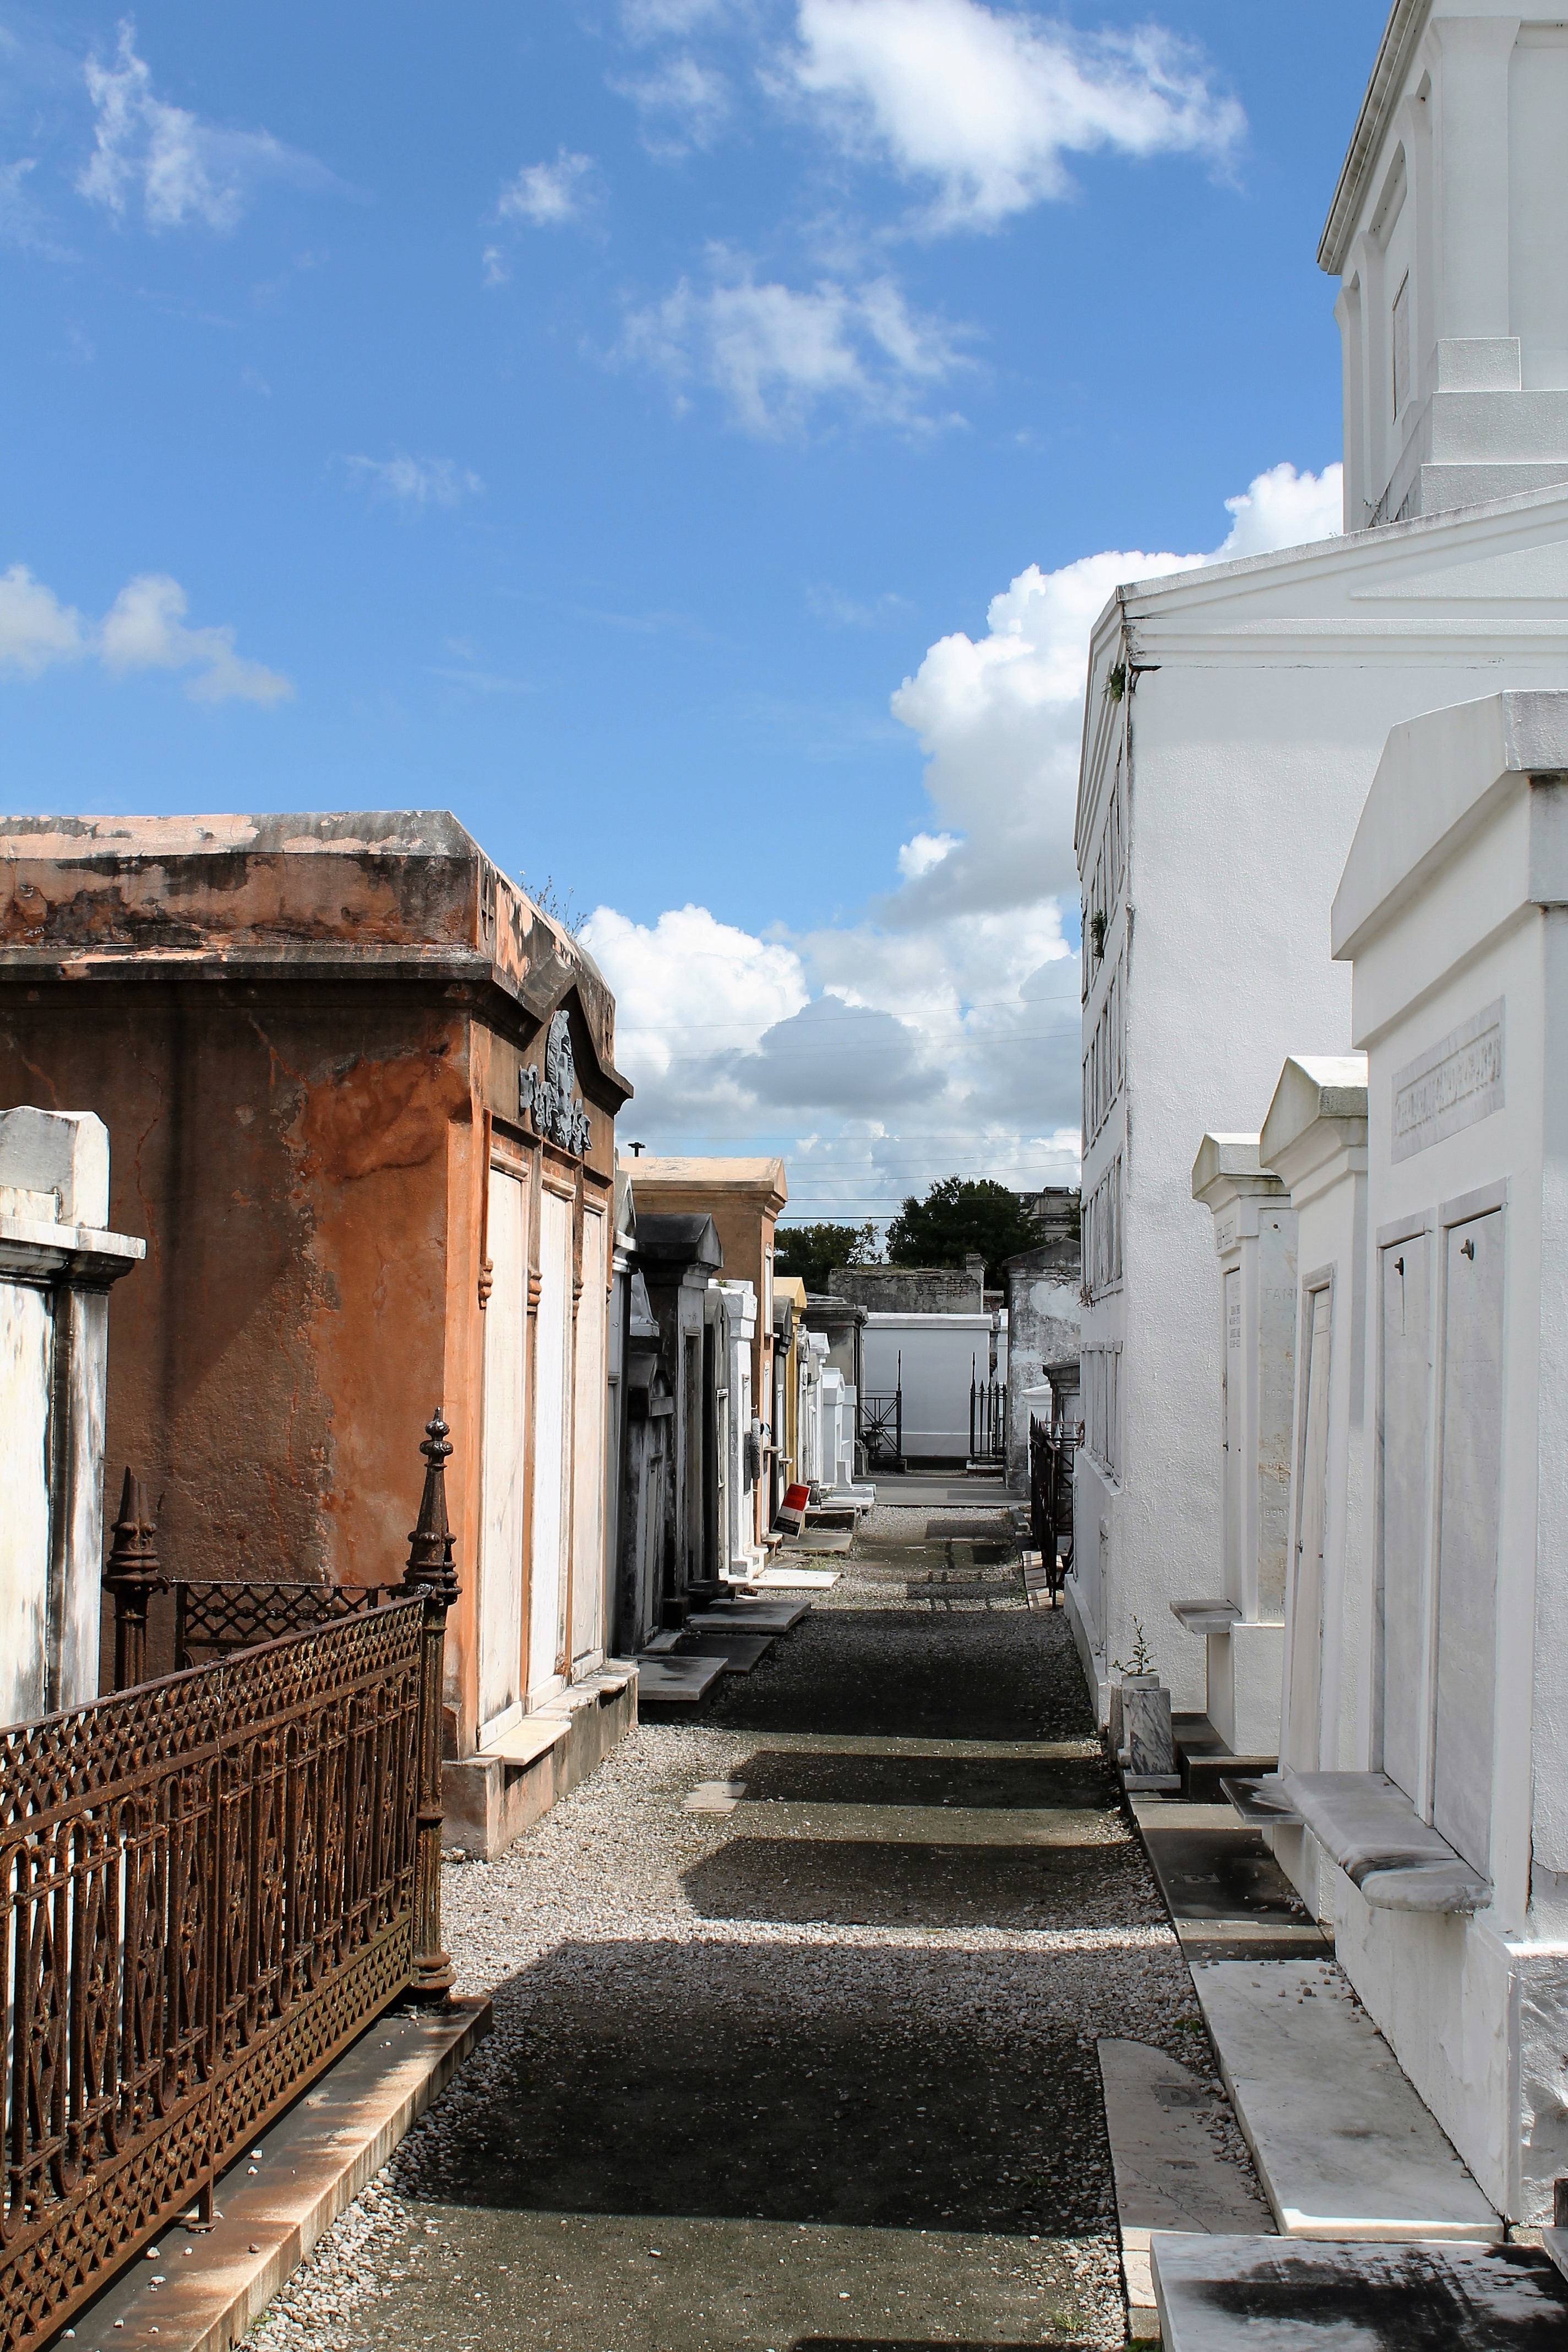  St Louis No.1 Cemetery a part of New Orleans Culture 